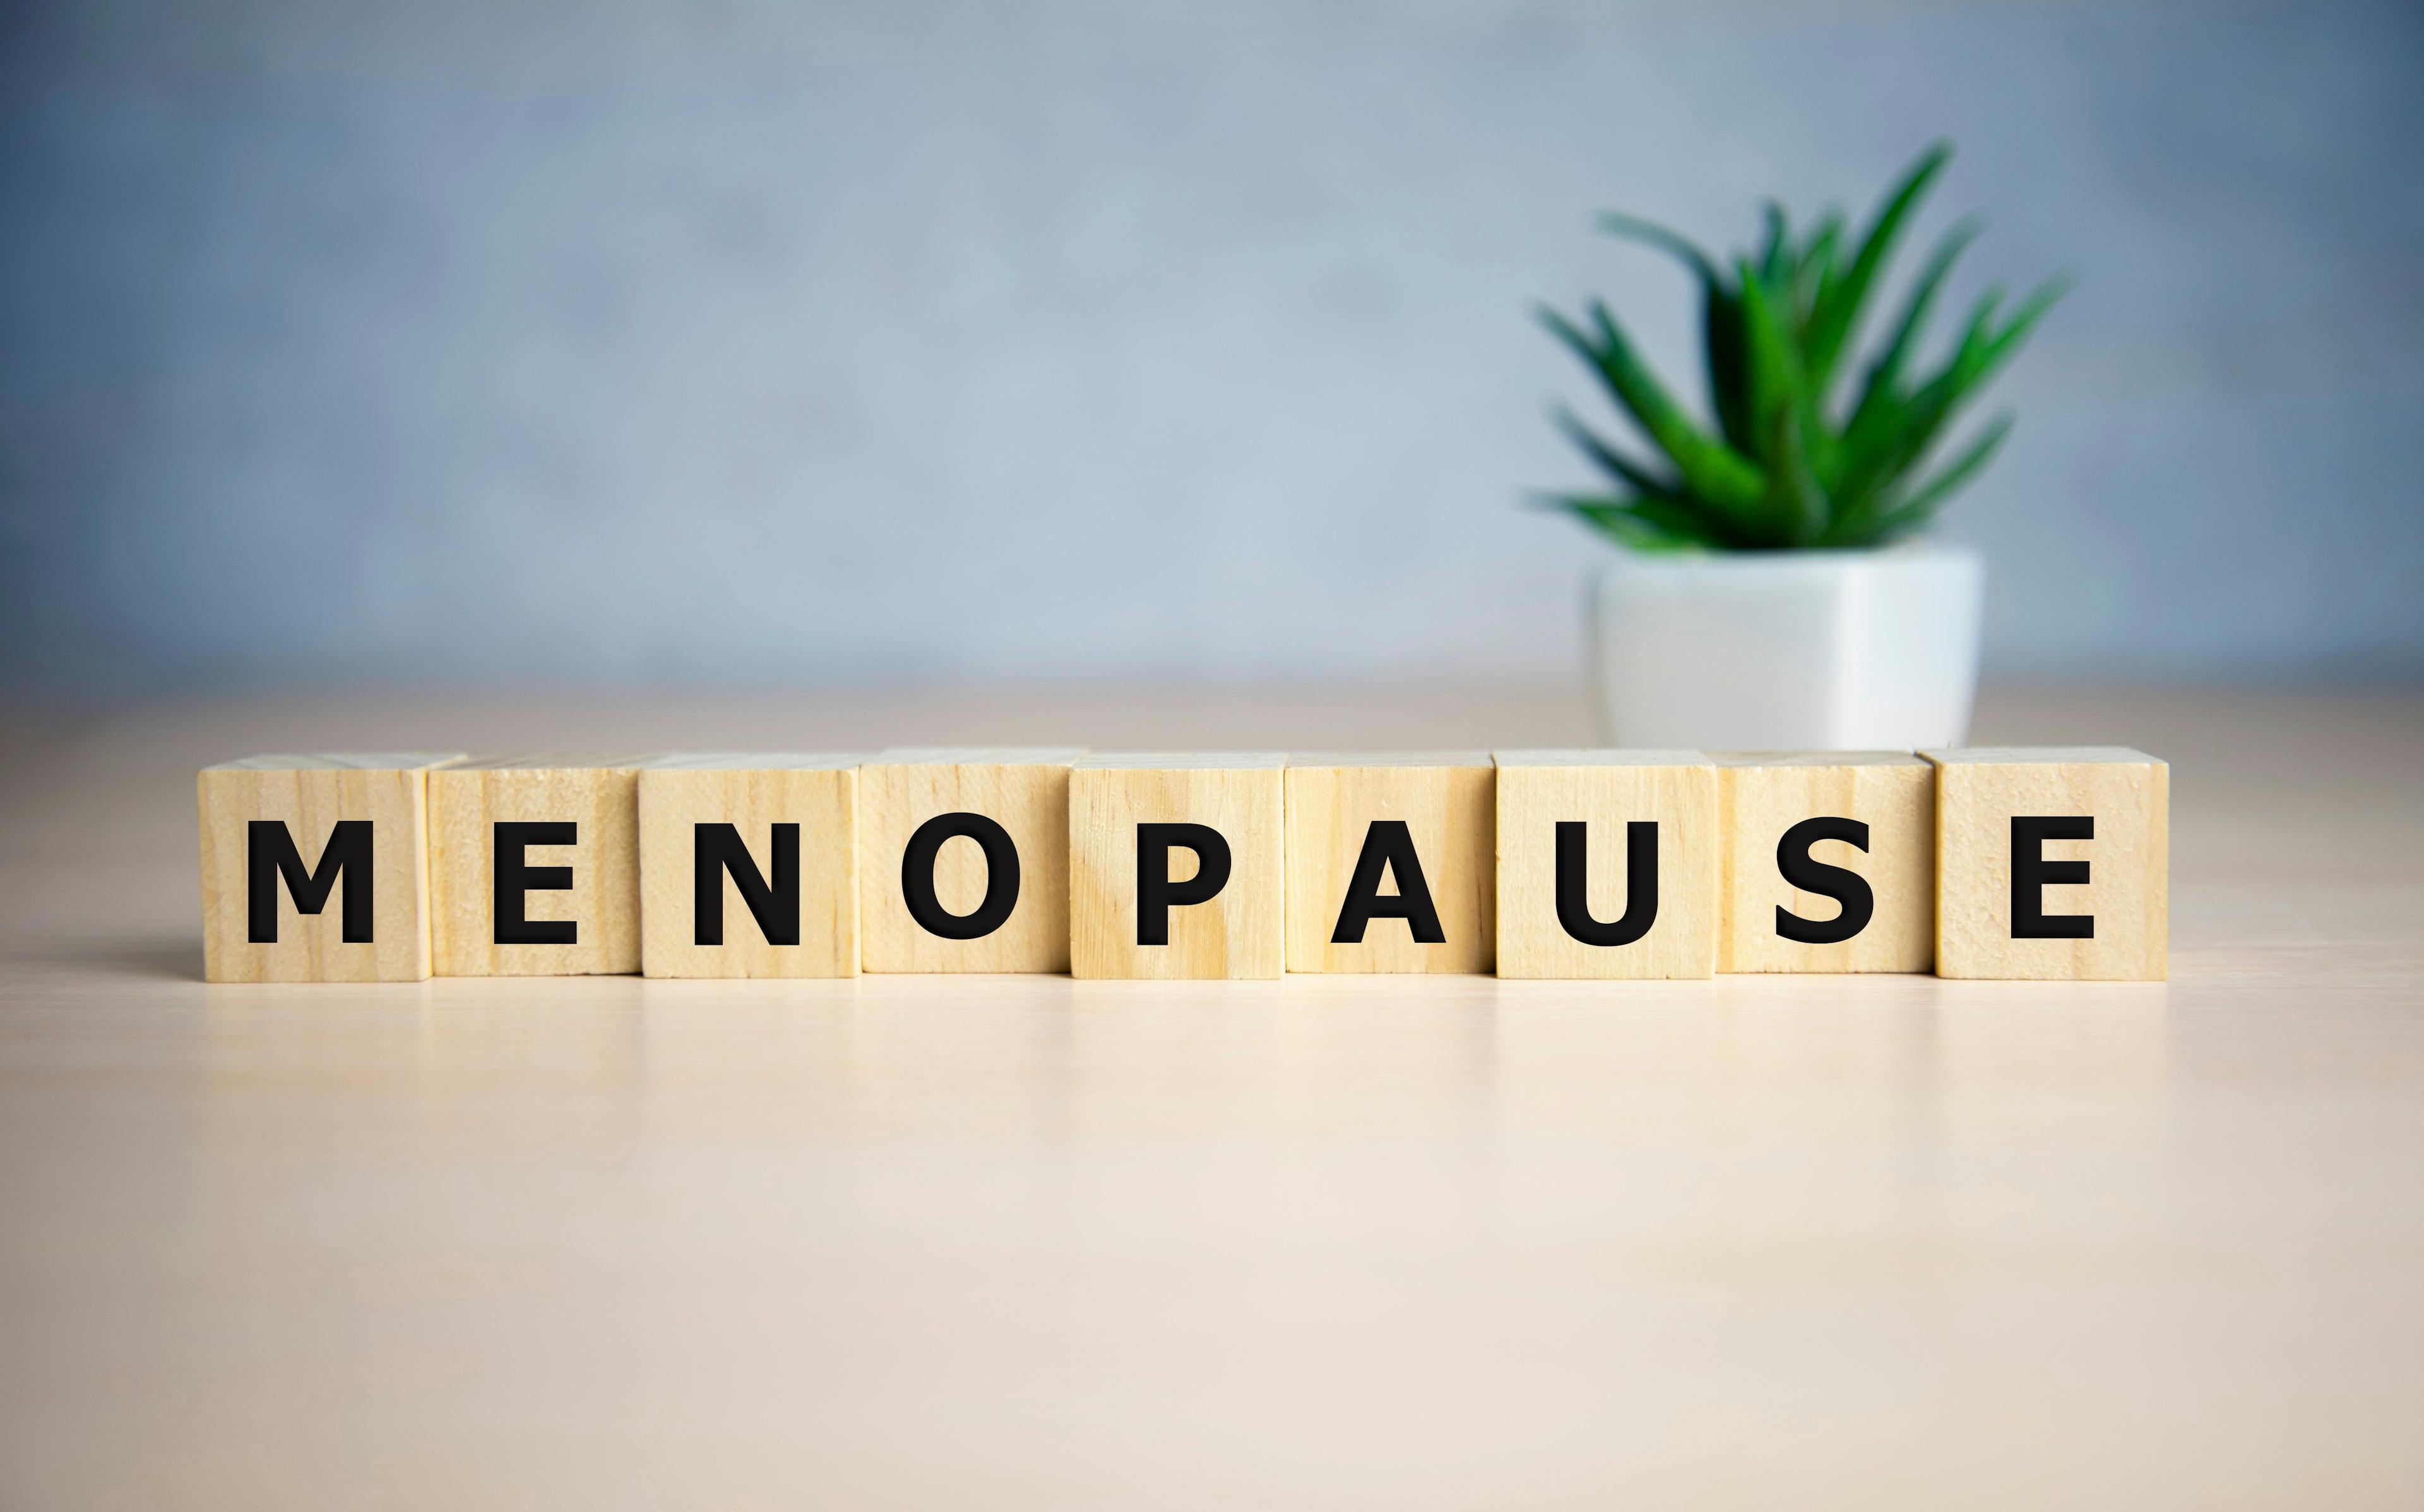 New Treatment Approved for Menopausal Hot Flashes